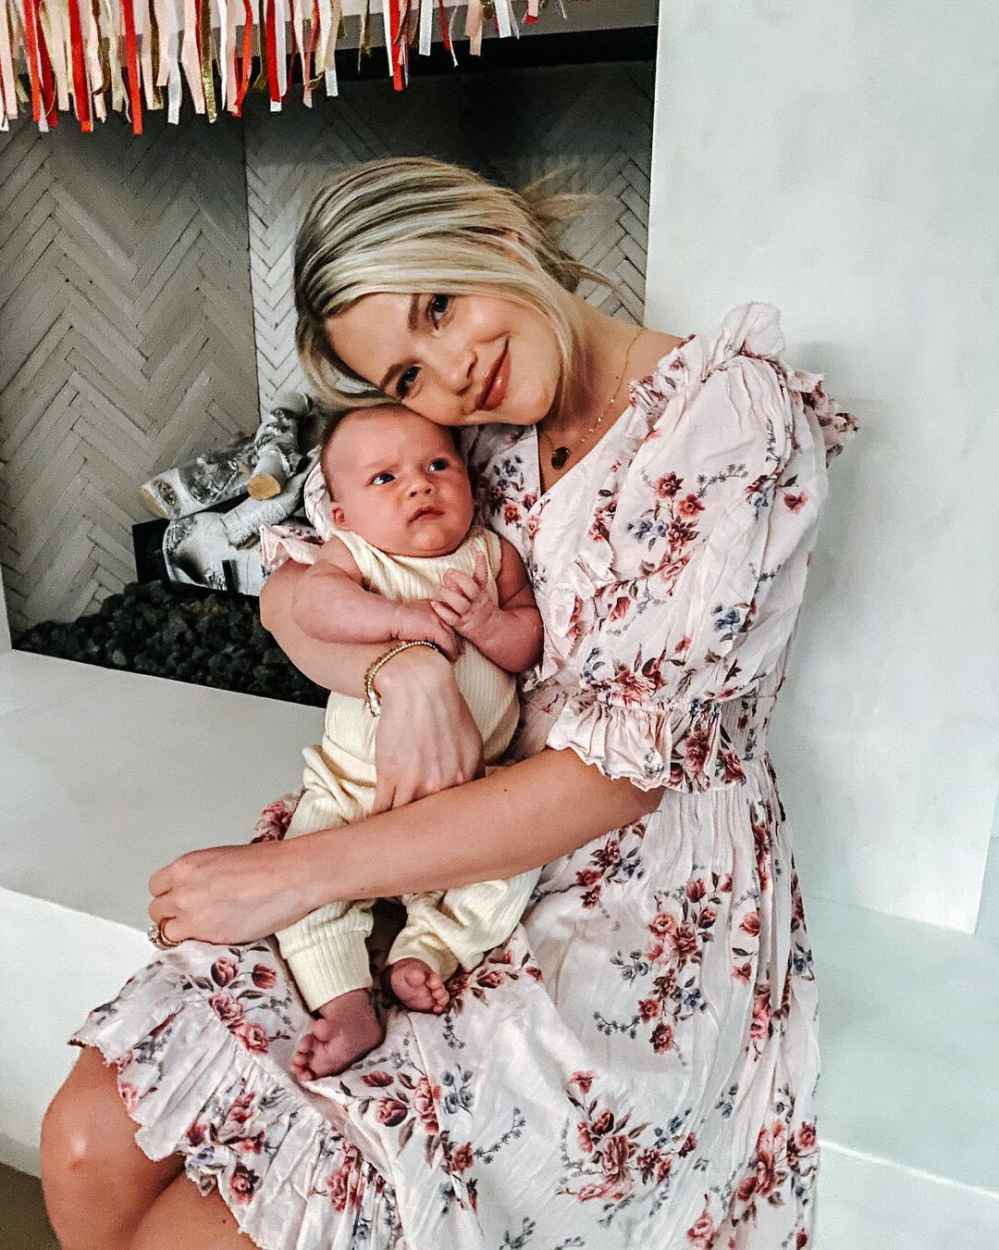 DWTS Witney Carson Opens Up About Postpartum Life